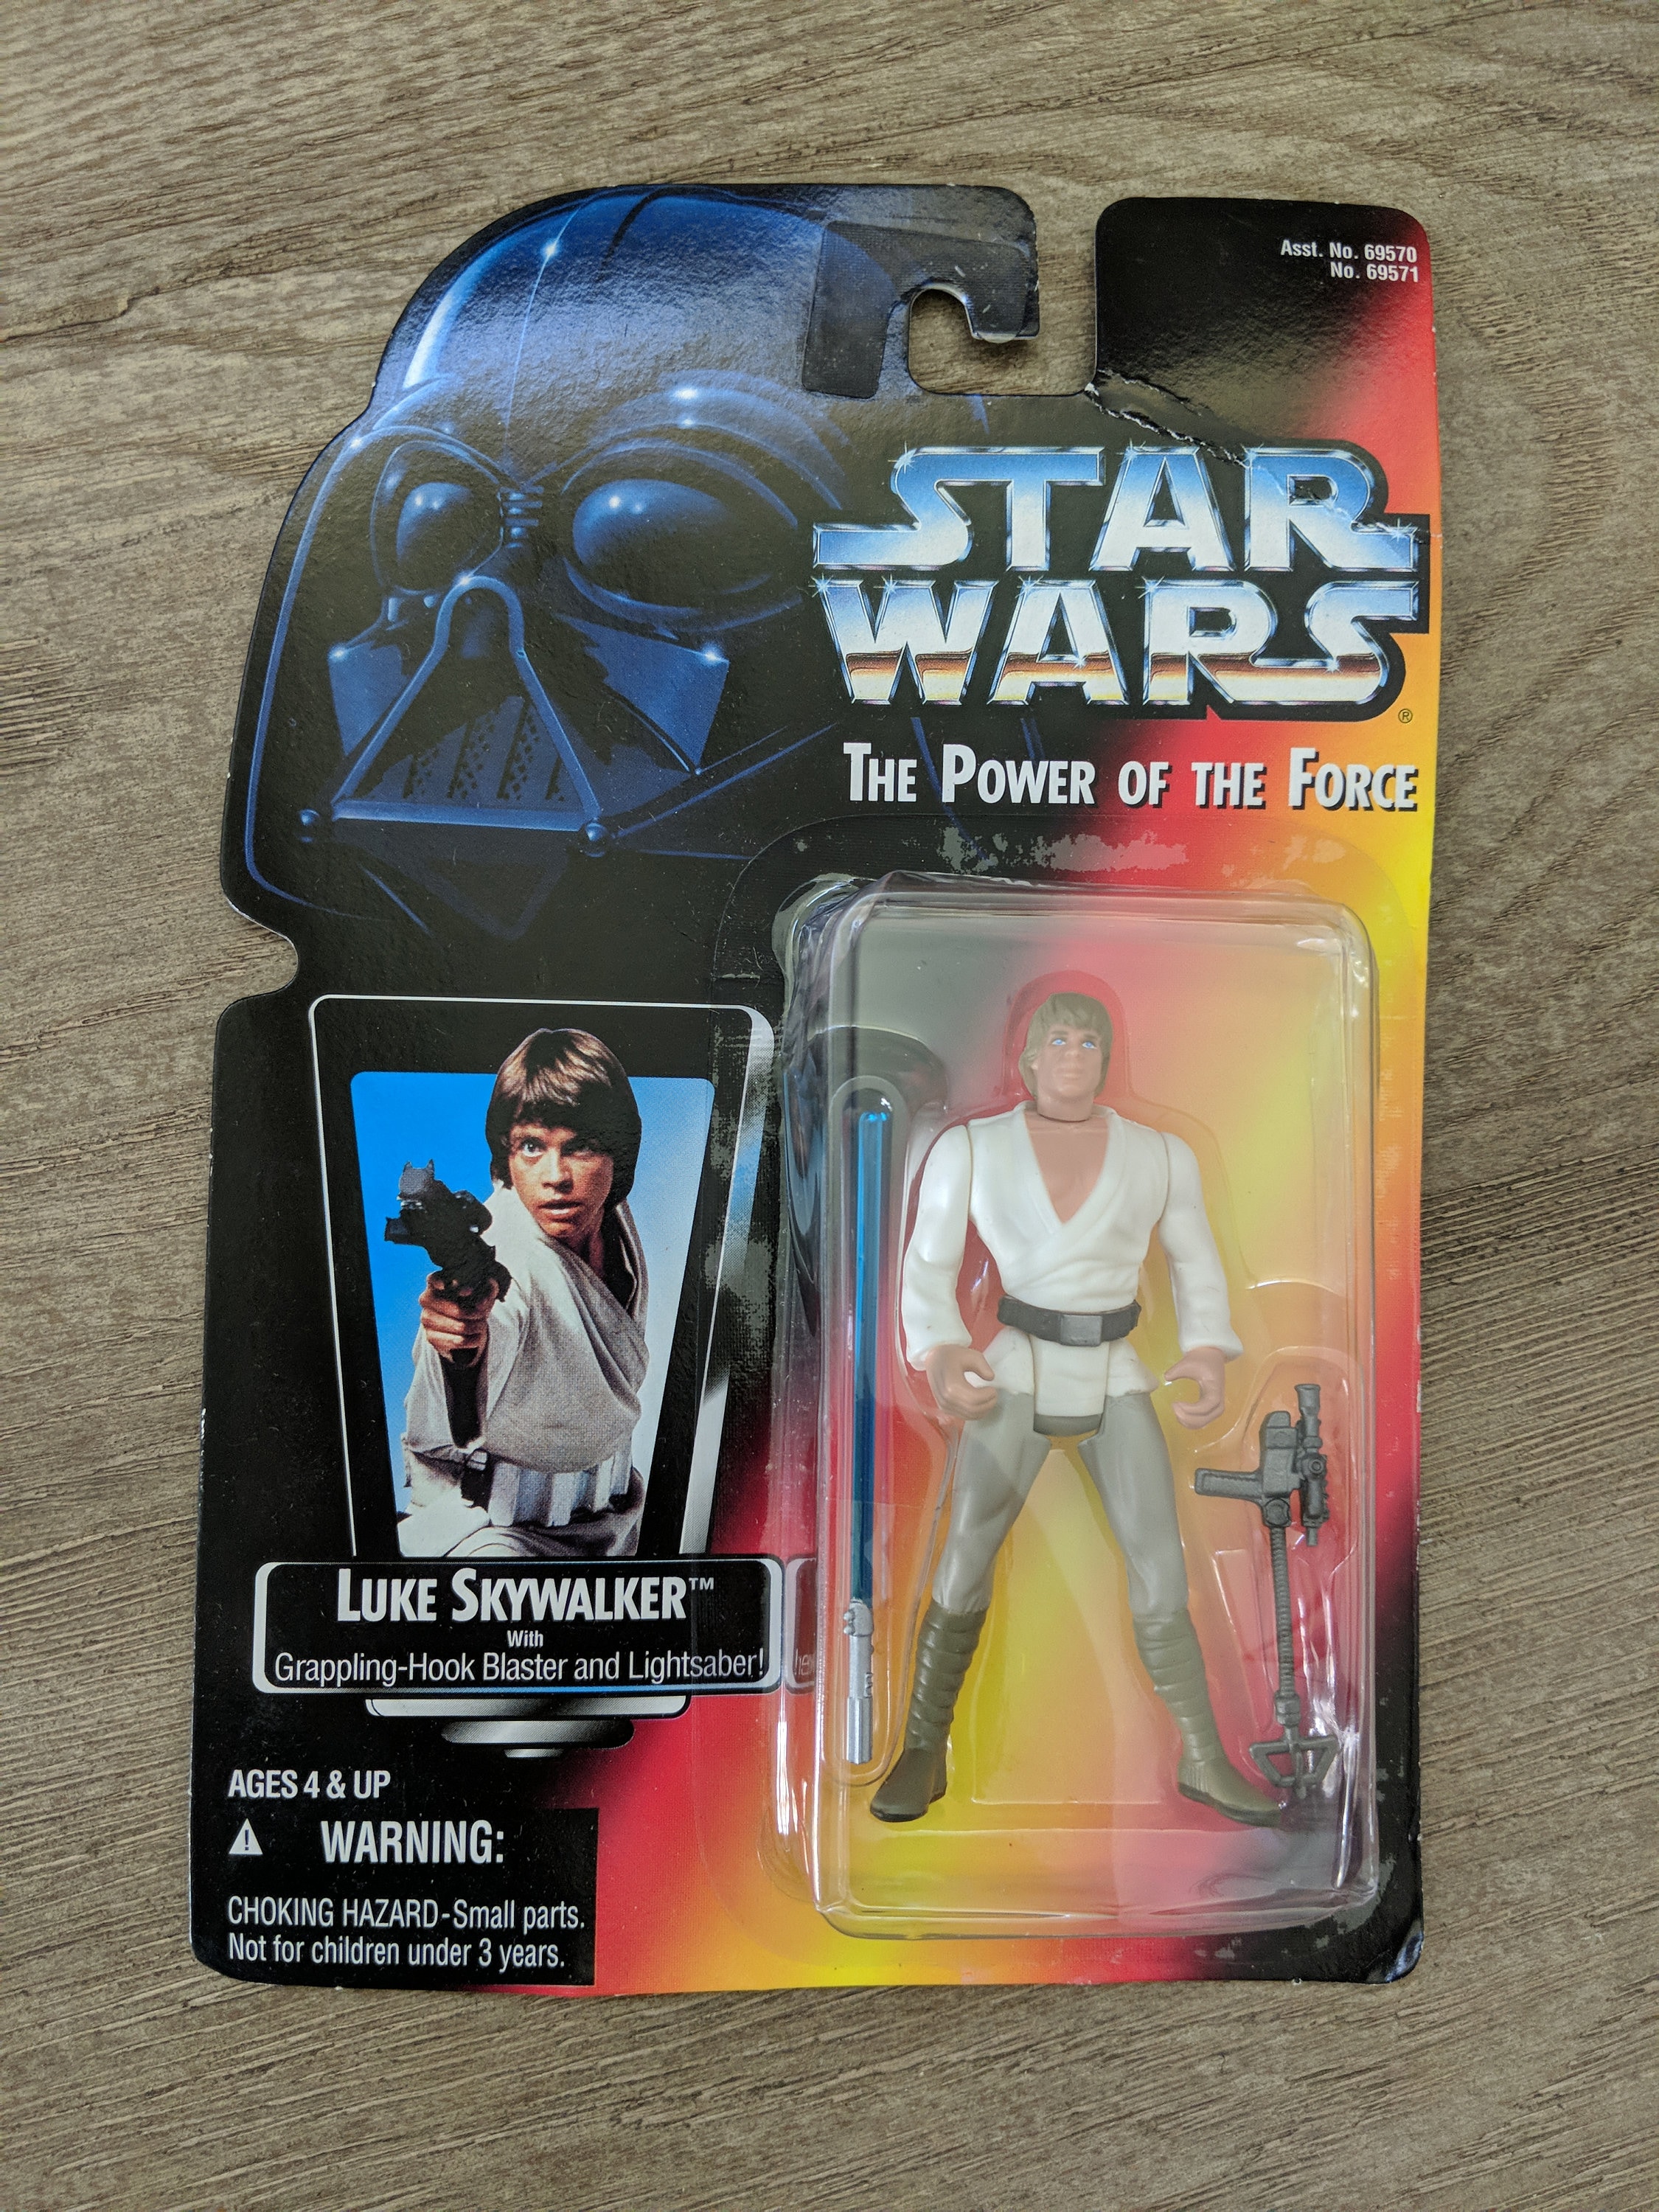 Luke With Grappling Hook Blaster and Lightsaber, Vintage Star Wars Toys,  Kenner the Power of the Force Luke Skywalker Starwars Toy New -  Norway